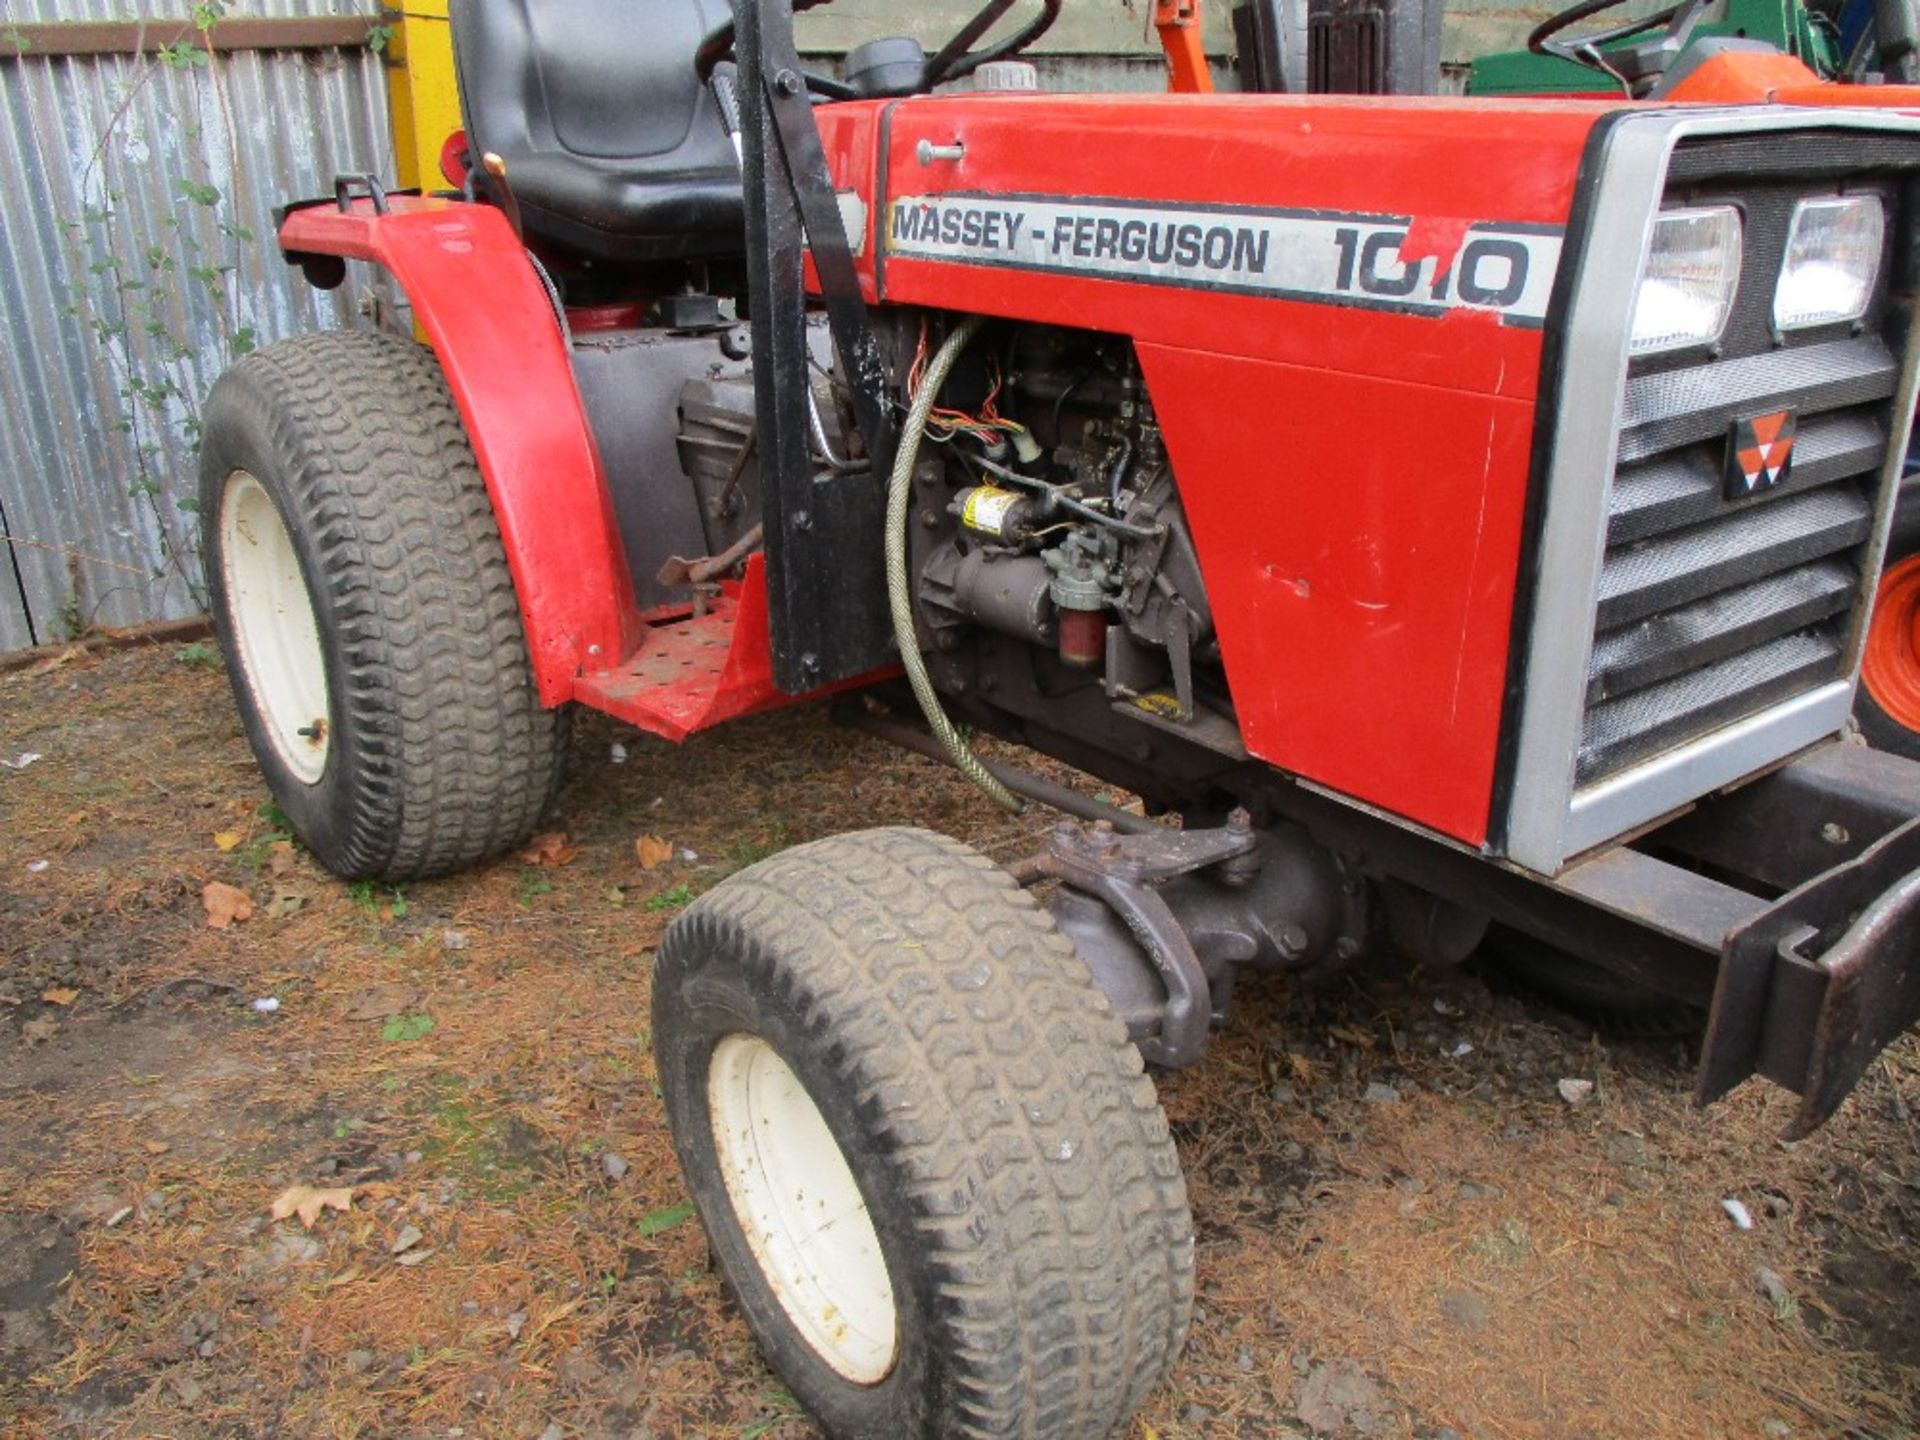 MASSEY FERGUSON 1010 4WD COMPACT TRACTOR WHEN TESTED WAS SEEN TO DRIVE, STEER AND BRAKE - Image 5 of 5